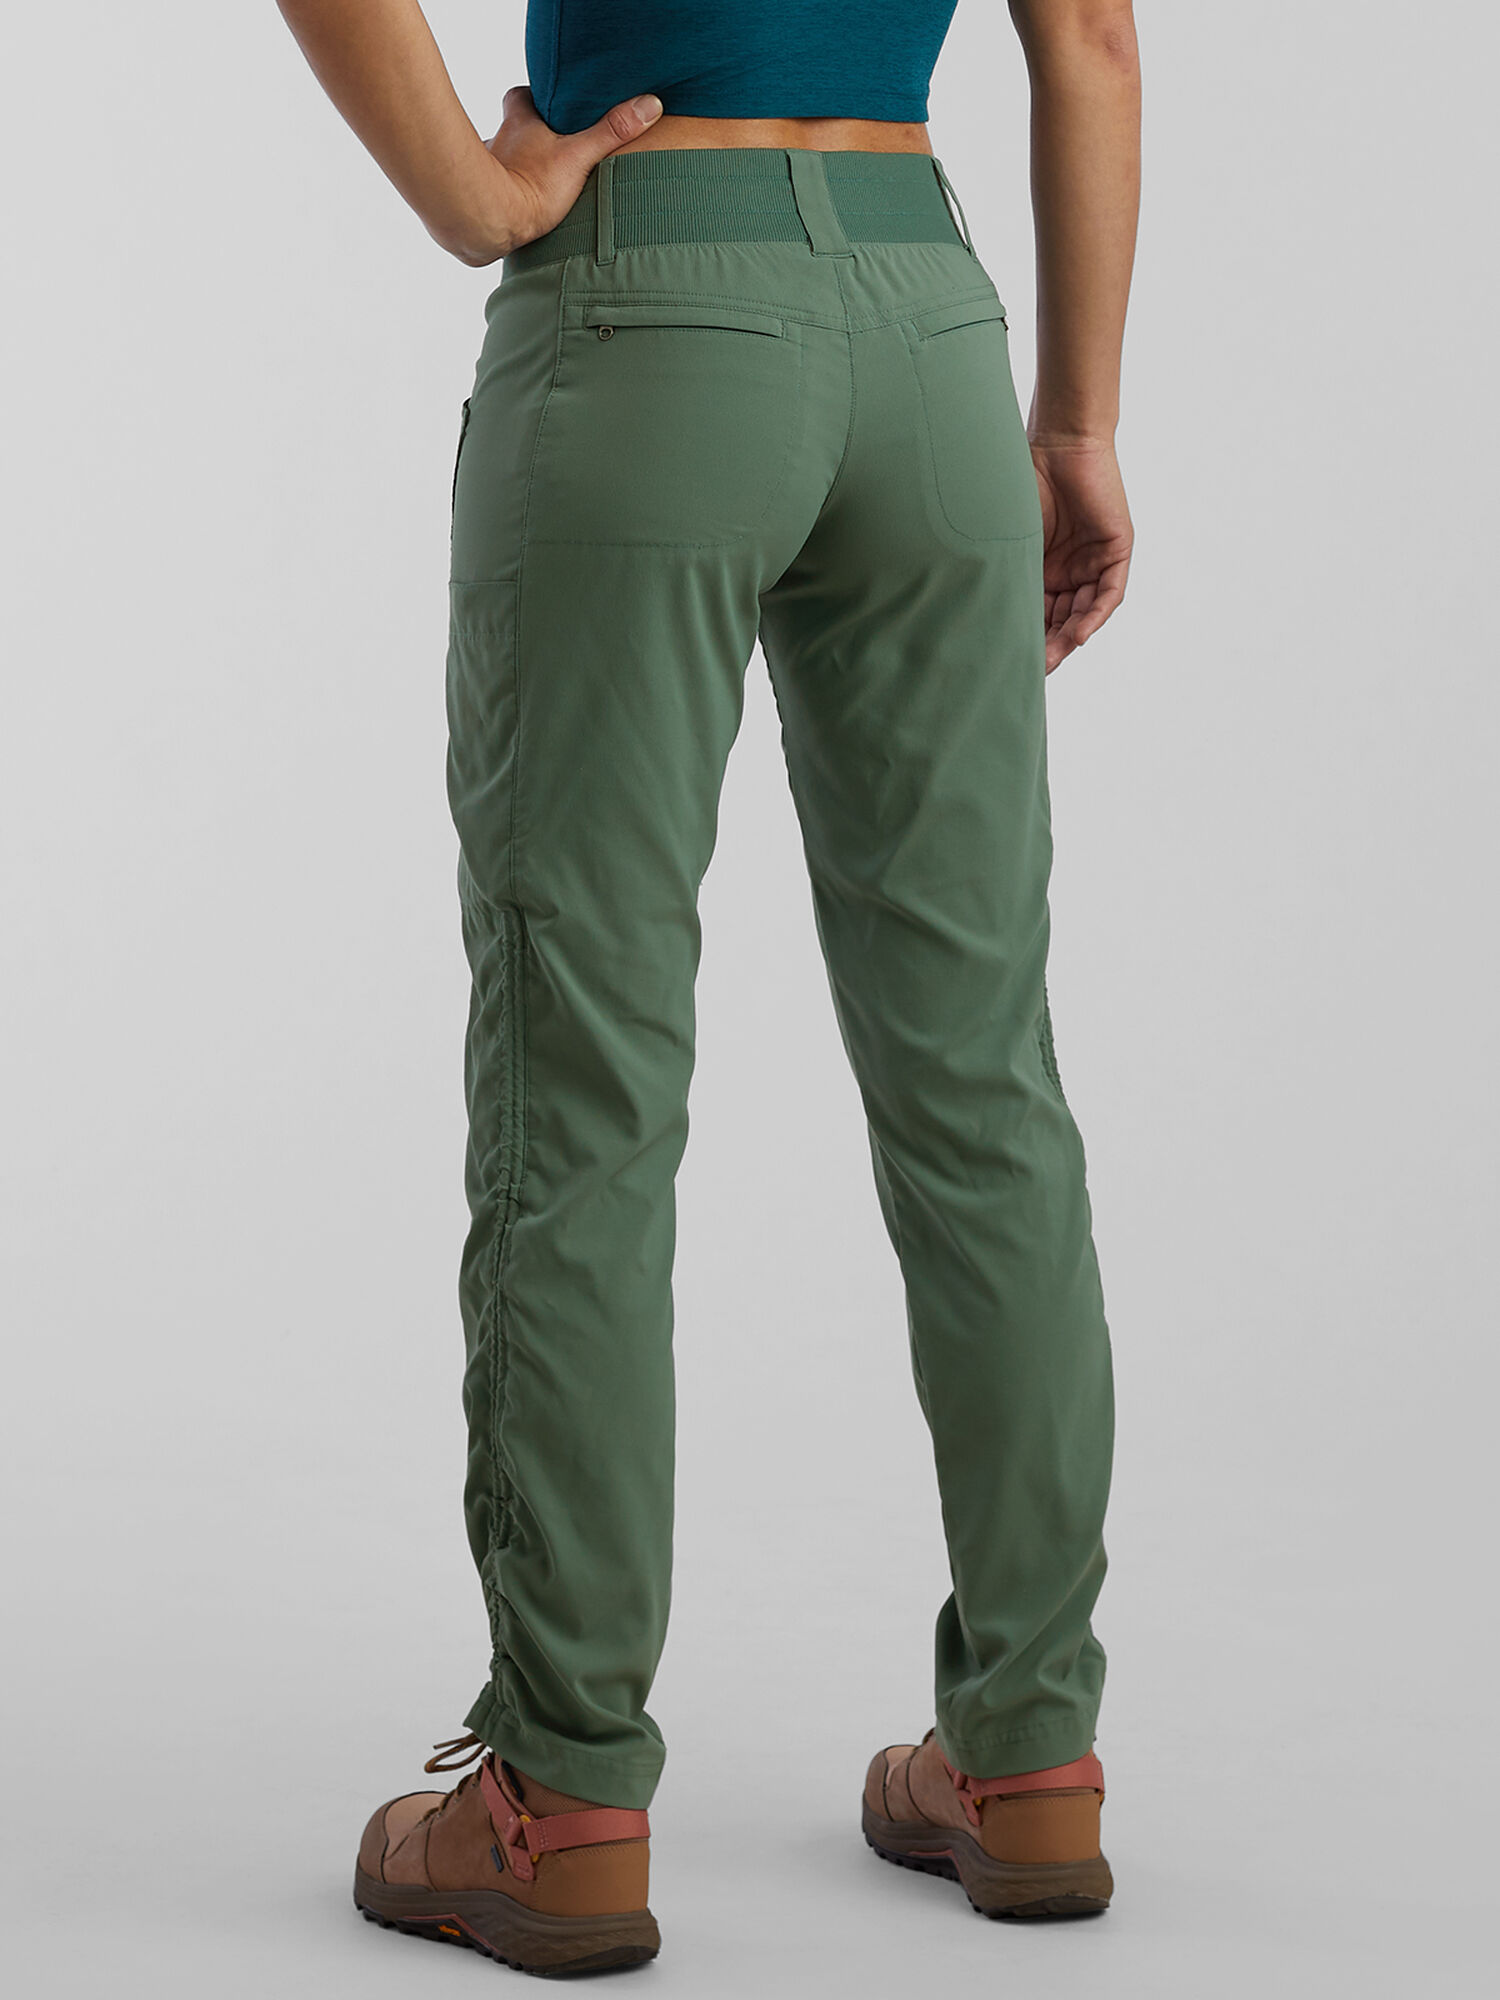 Hiking Pants Women: Recycled Clamber 30